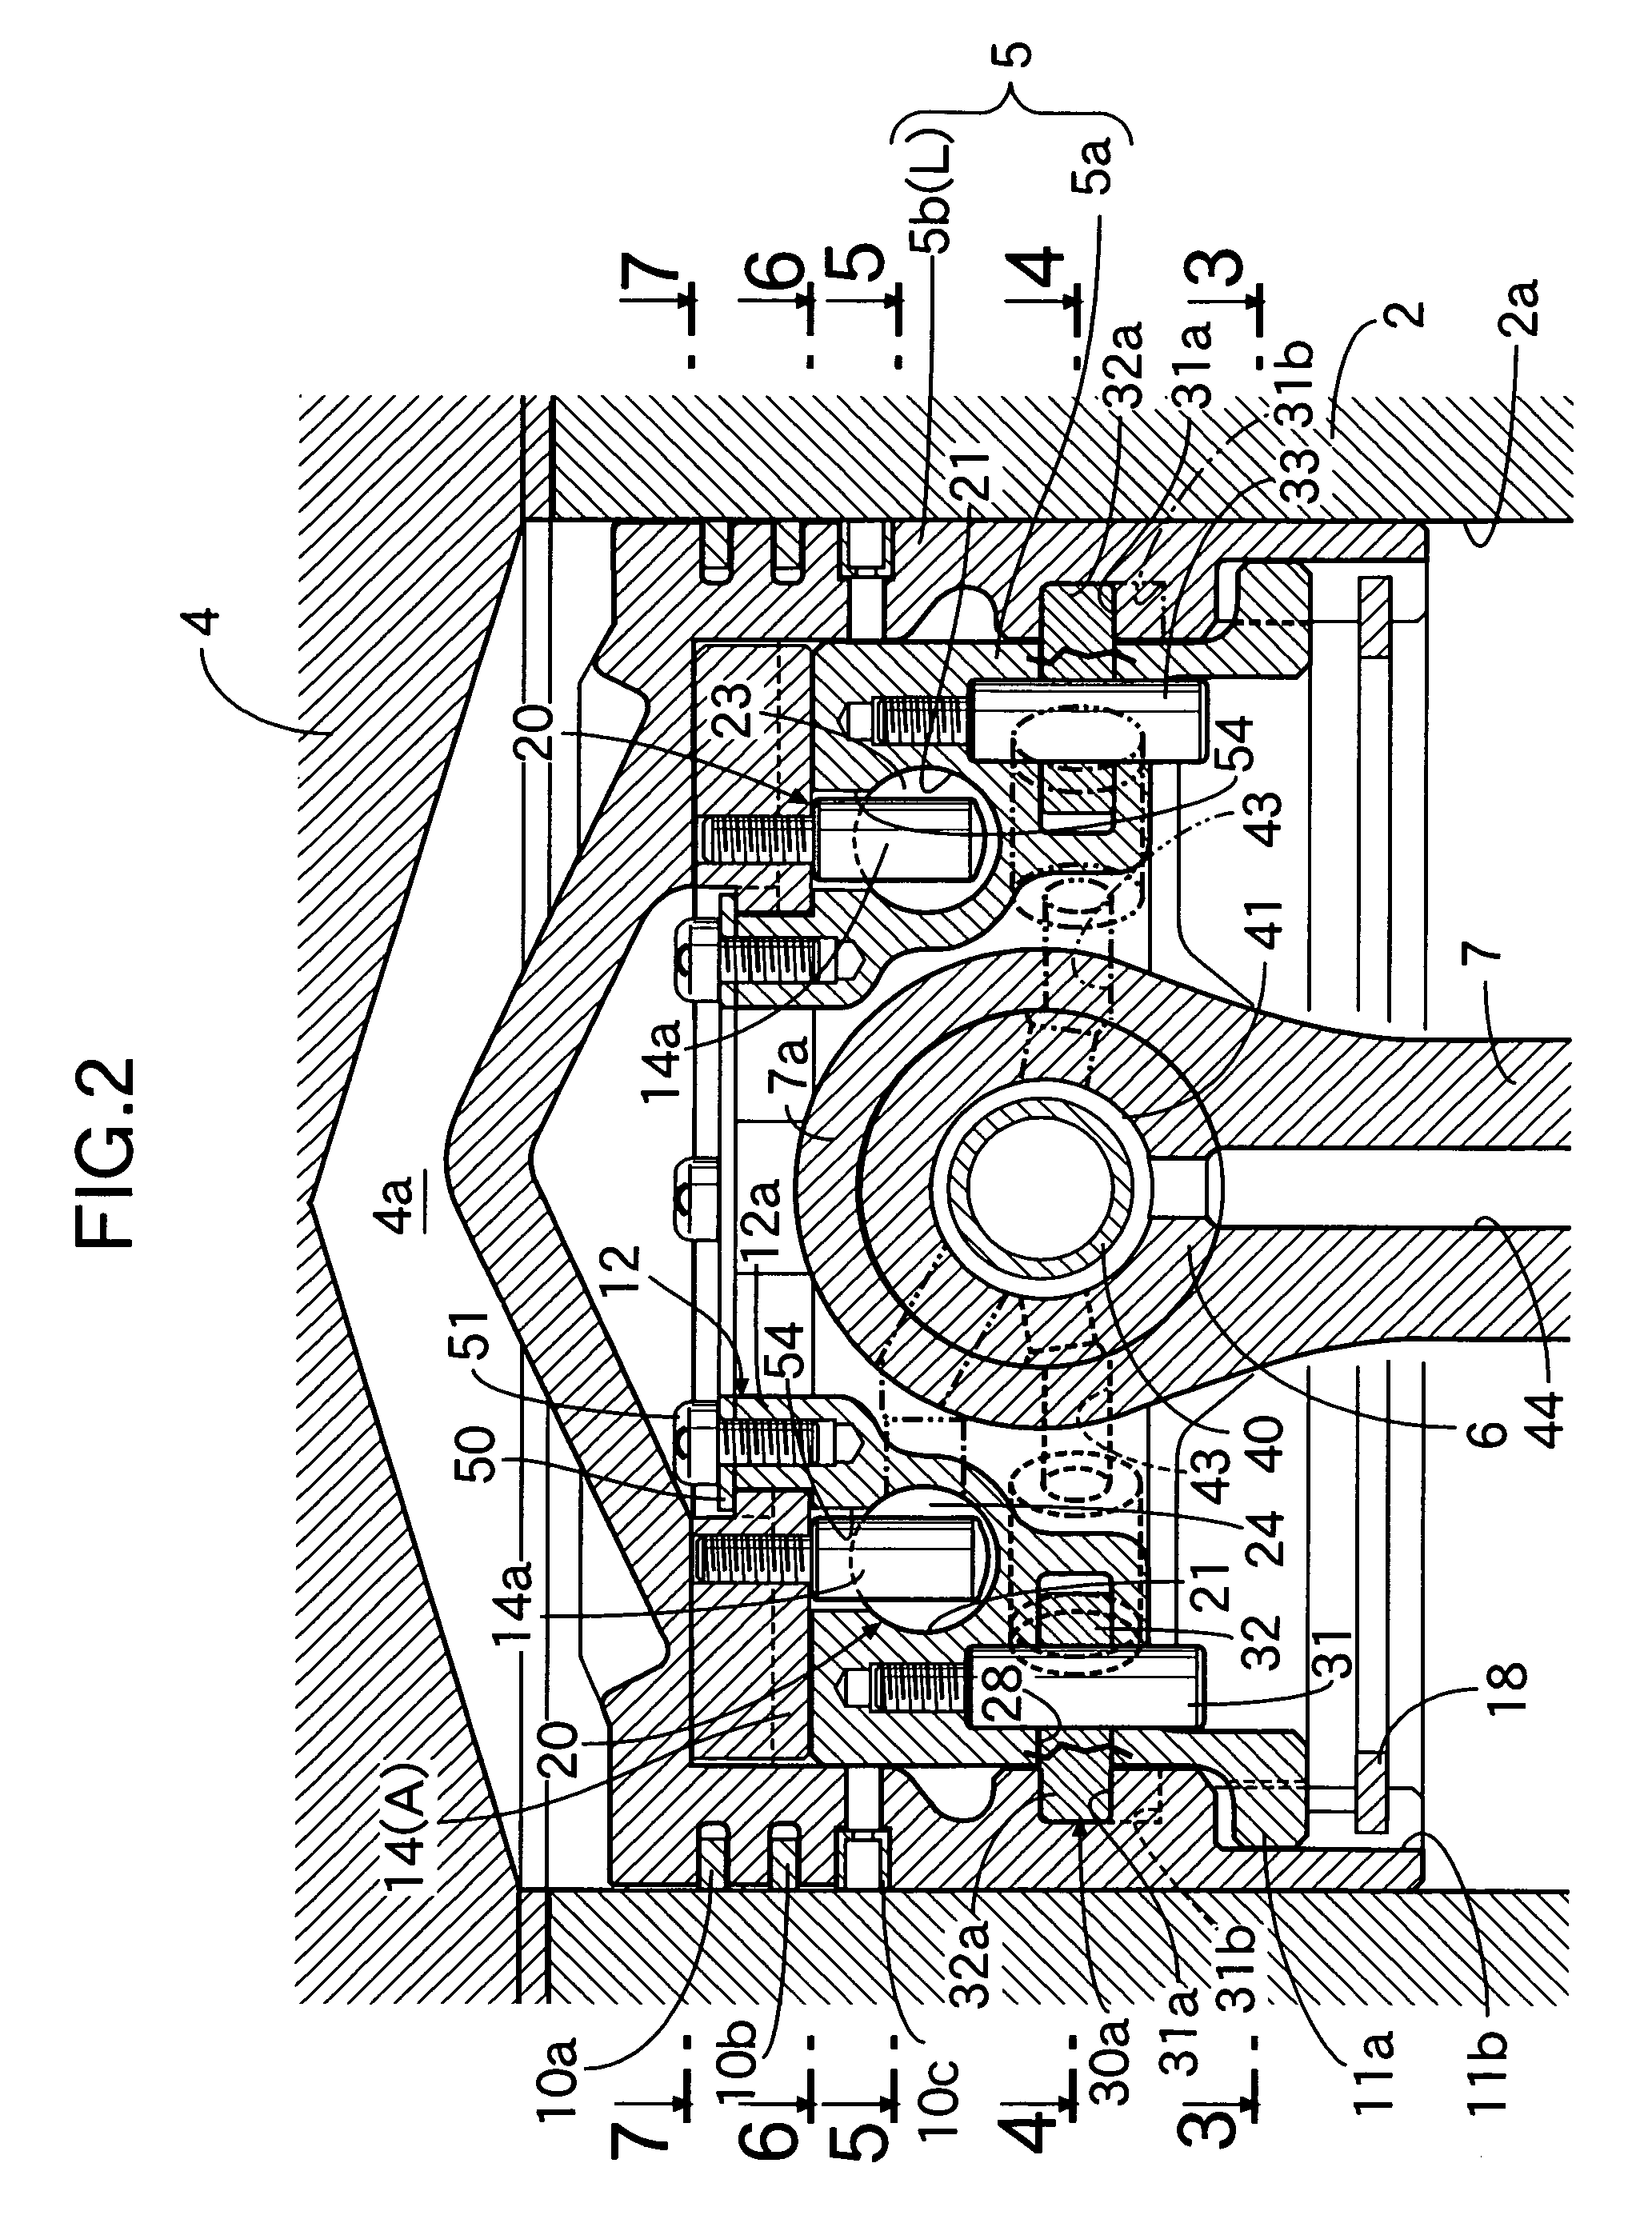 Compression ratio variable device of internal combustion engine